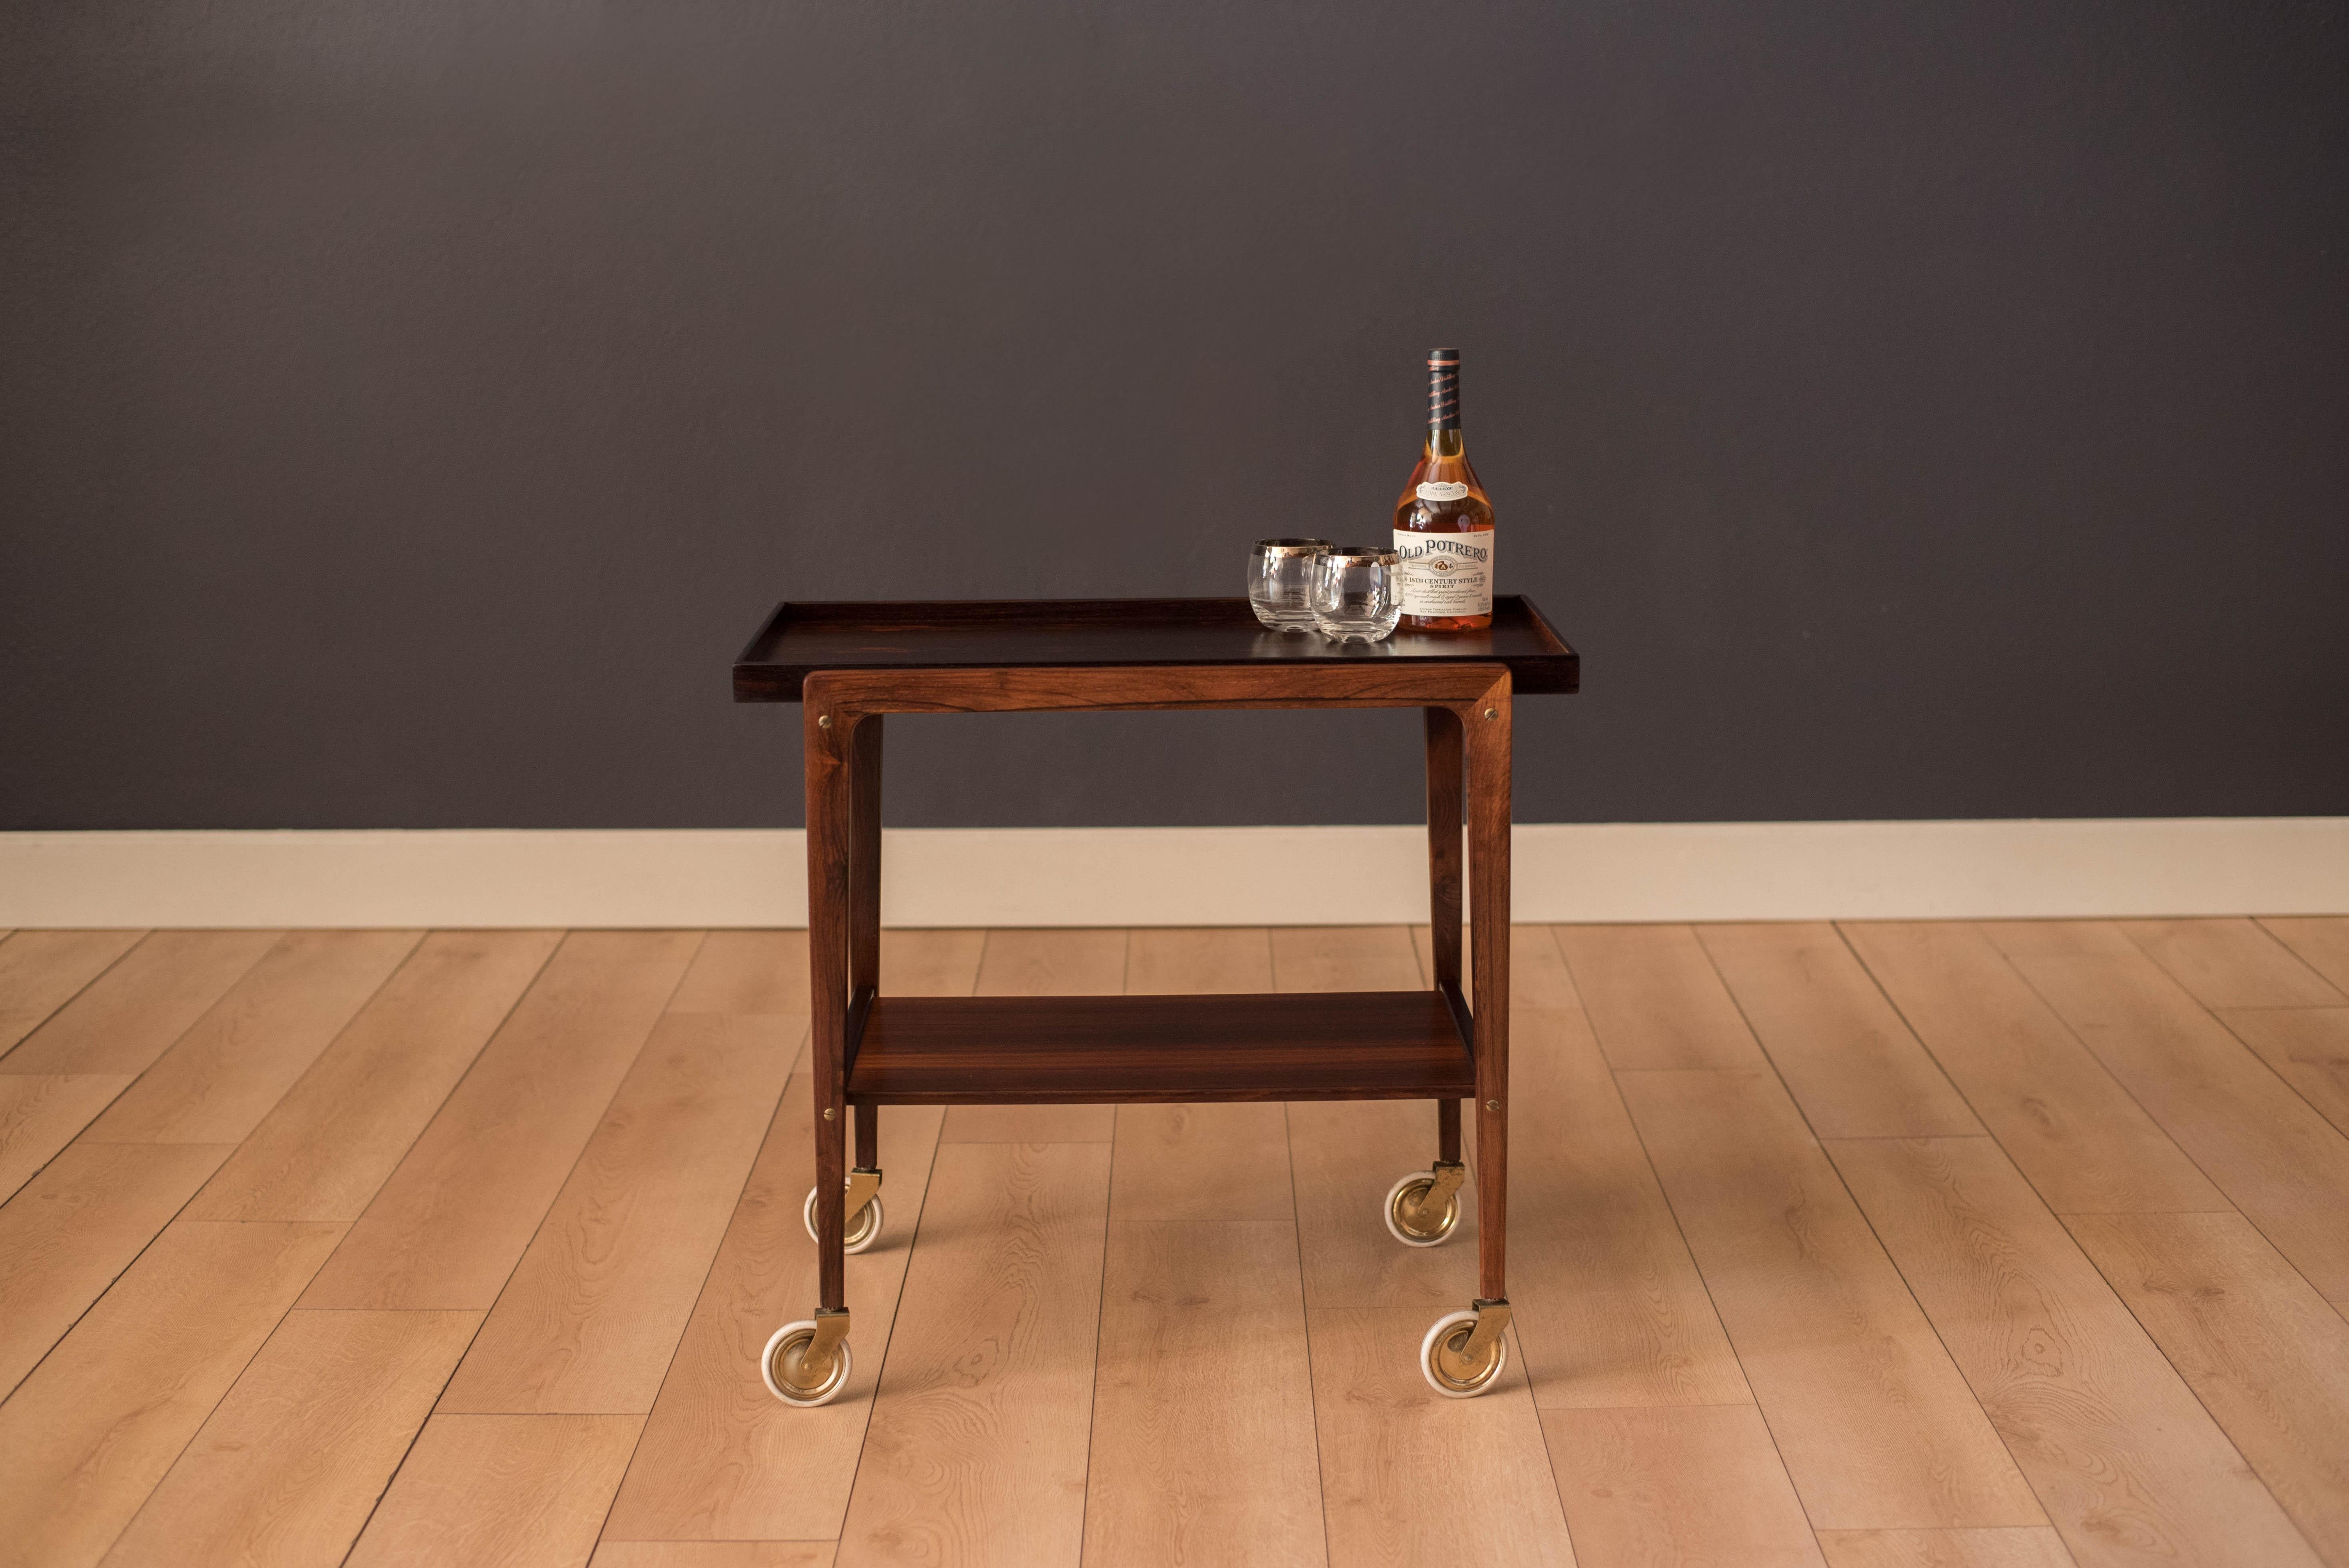 Mid-Century Modern bar cart in rosewood, circa 1960s. Features a removable tray top with dovetail construction supported by a sculptural frame with exposed bridal joints. This piece includes two-tier storage and rolls on original casters for easy